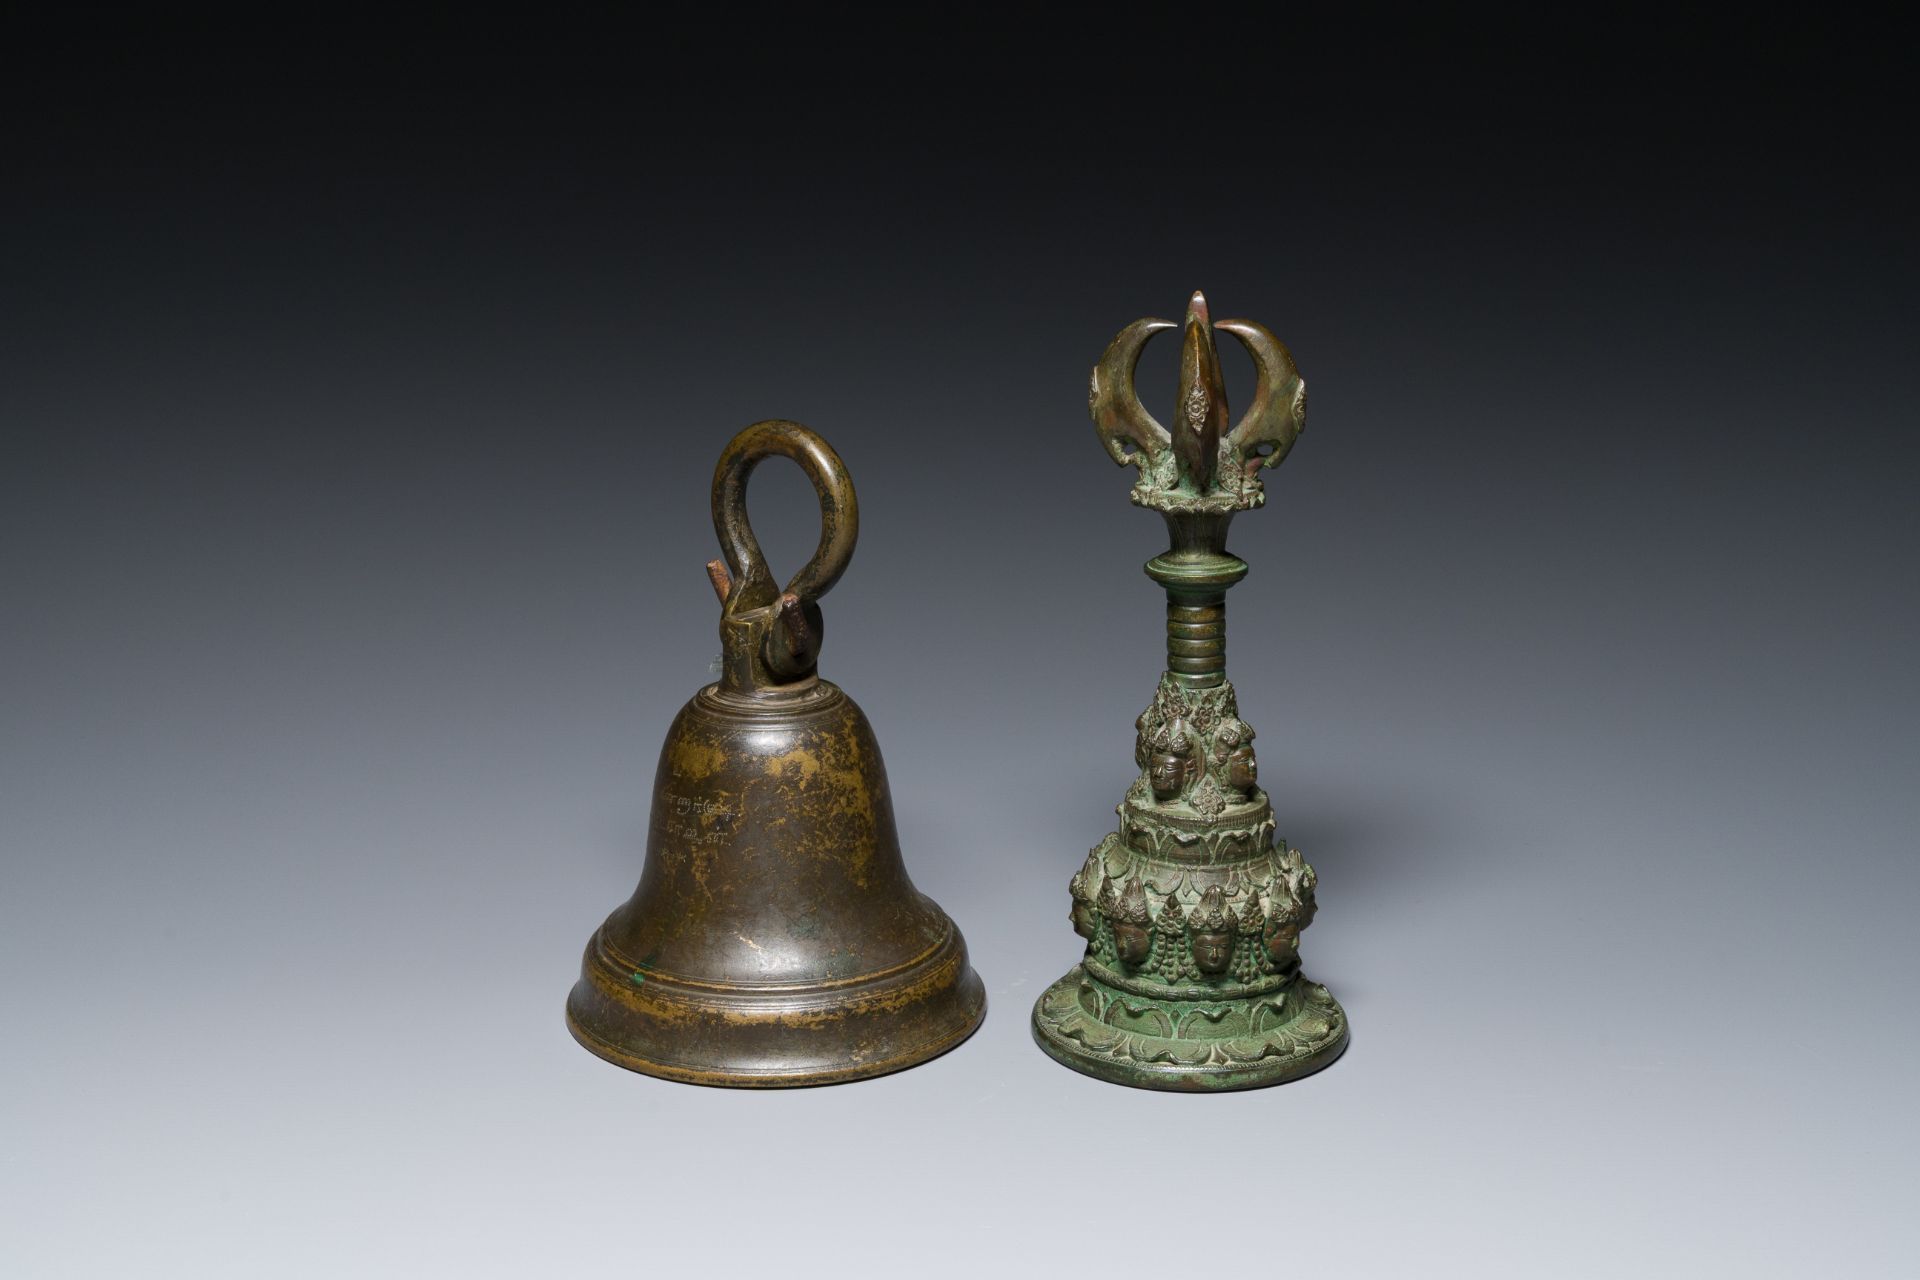 A bronze bell and a ceremonial hand bell, South Asia and Southeast Asia, 19th C. or earlier - Bild 2 aus 21